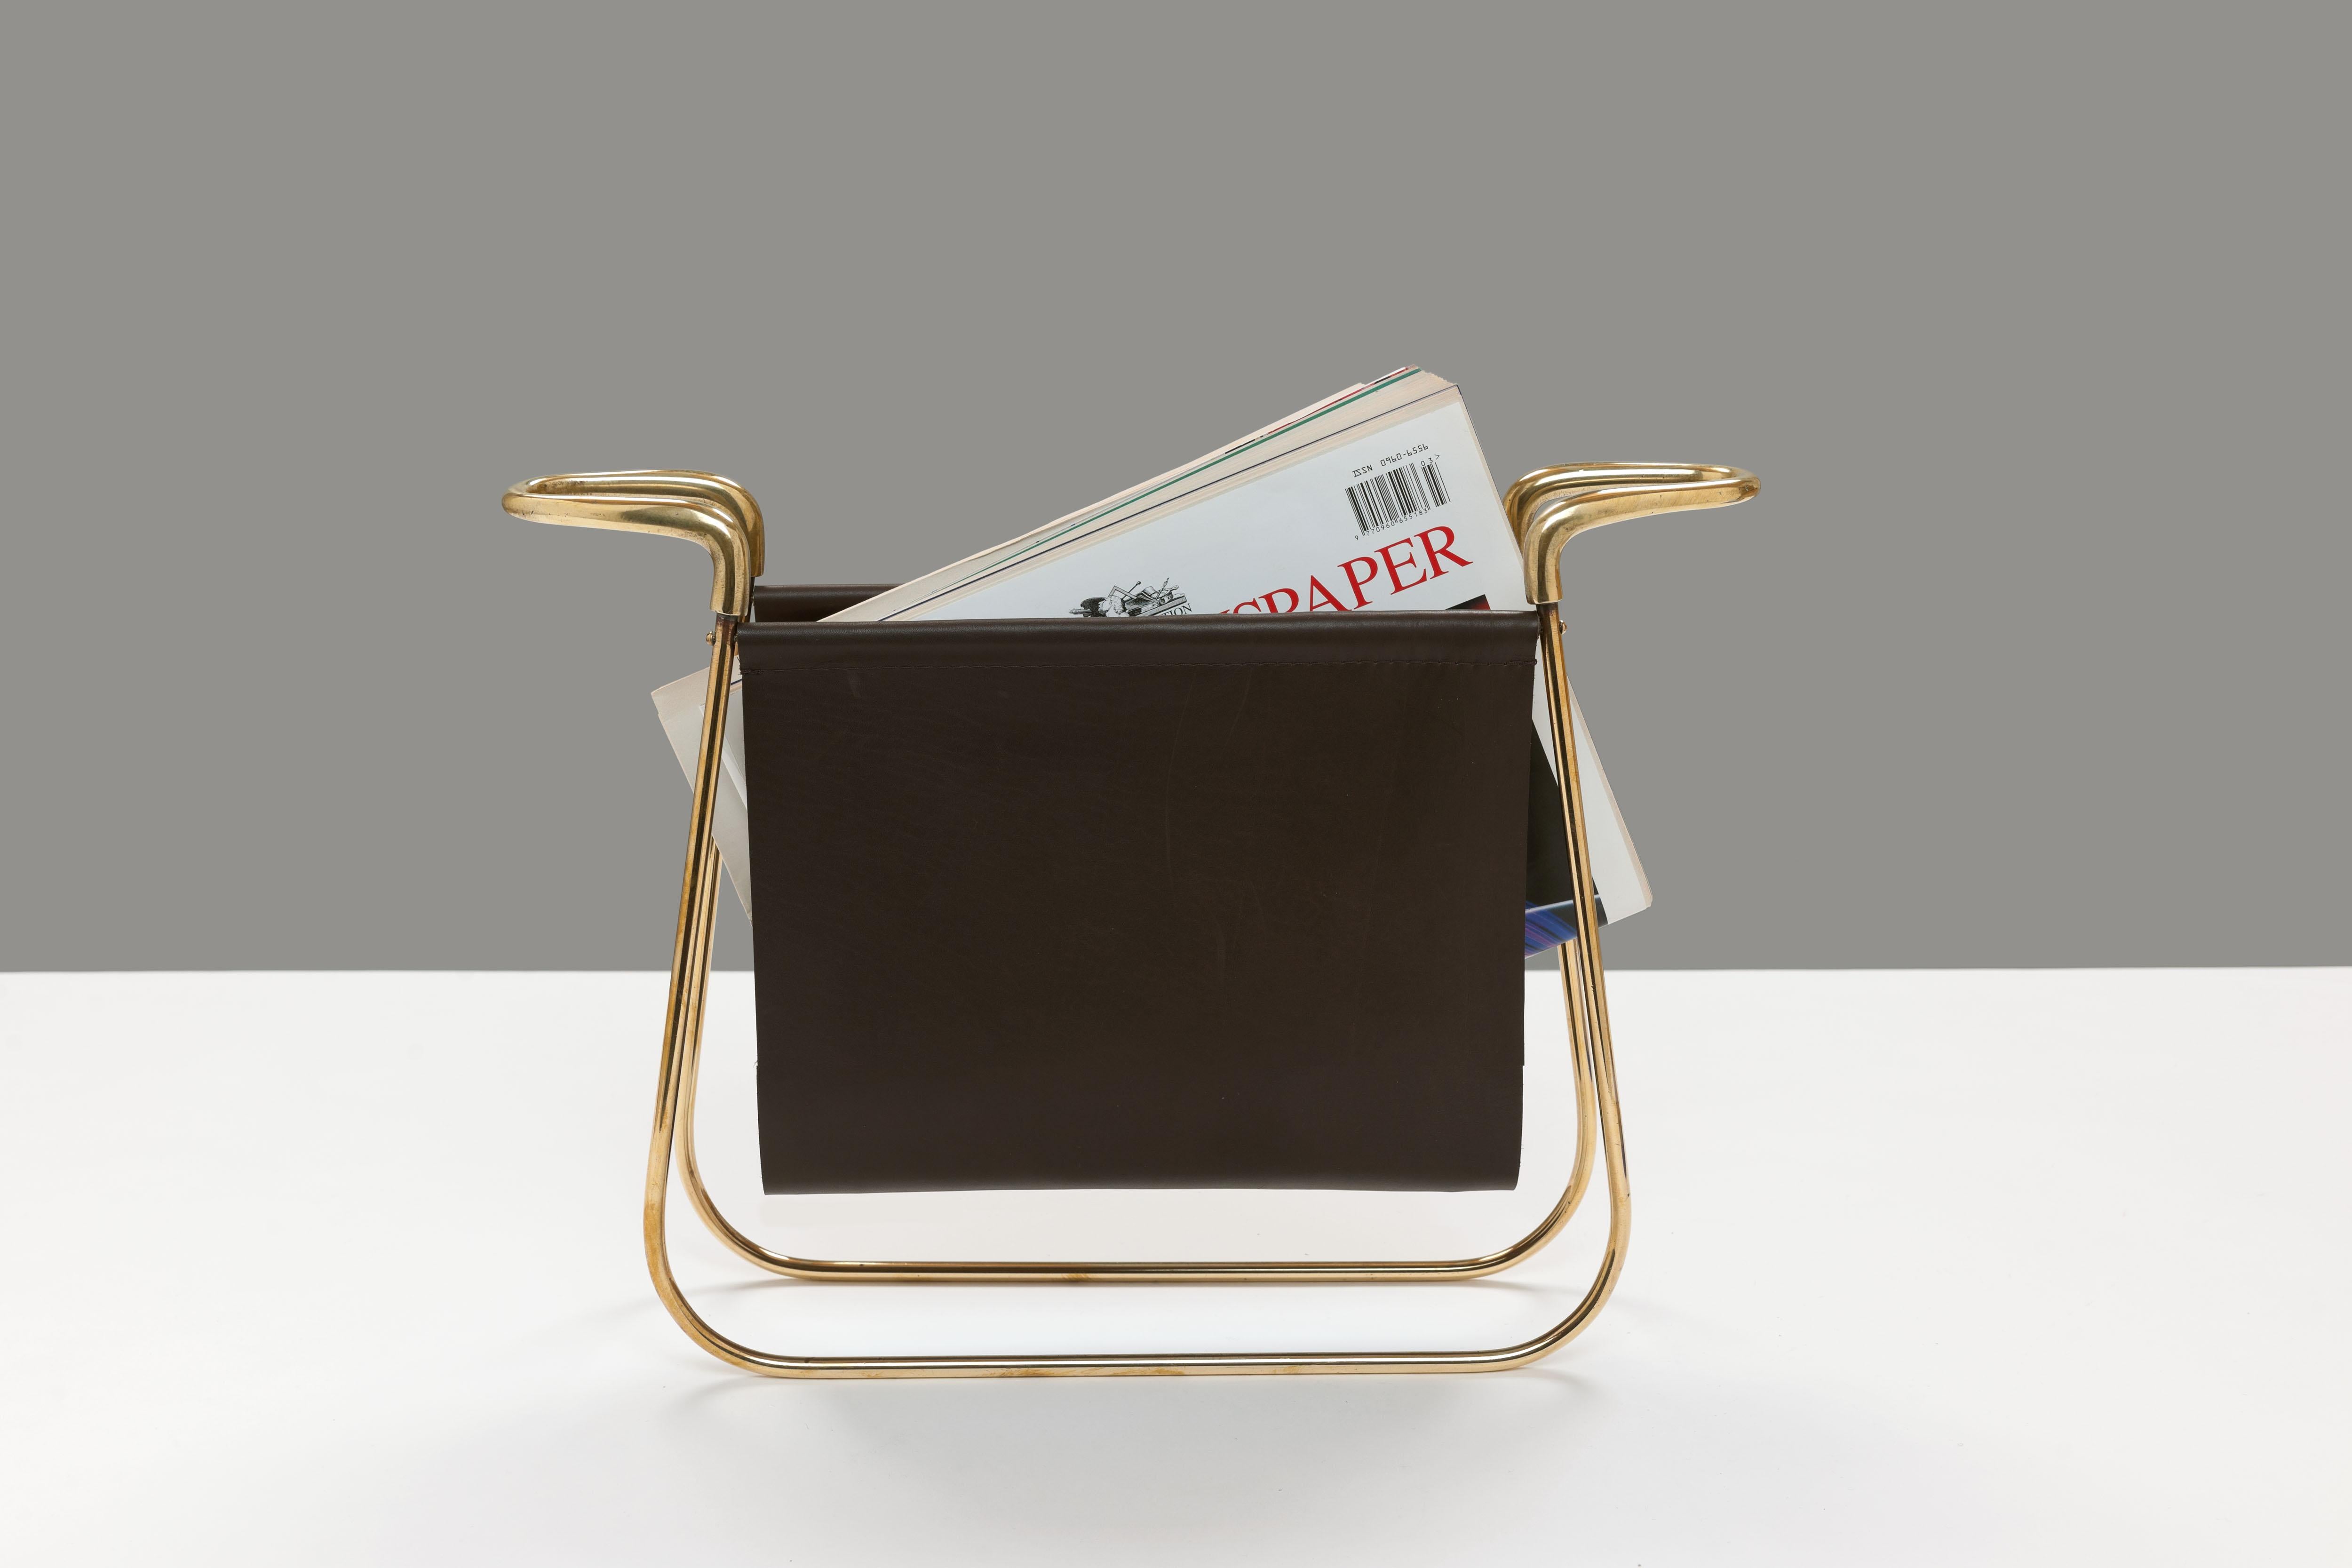 Solid brass and dark brown saddle leather magazine holder by Carl Aubock, Vienna from early 1960. 
Rare model 3608 magazine stand in solid brass & leather hand crafted at the renown and important Carl Aubock Workshop, Austria.  

A very rare model